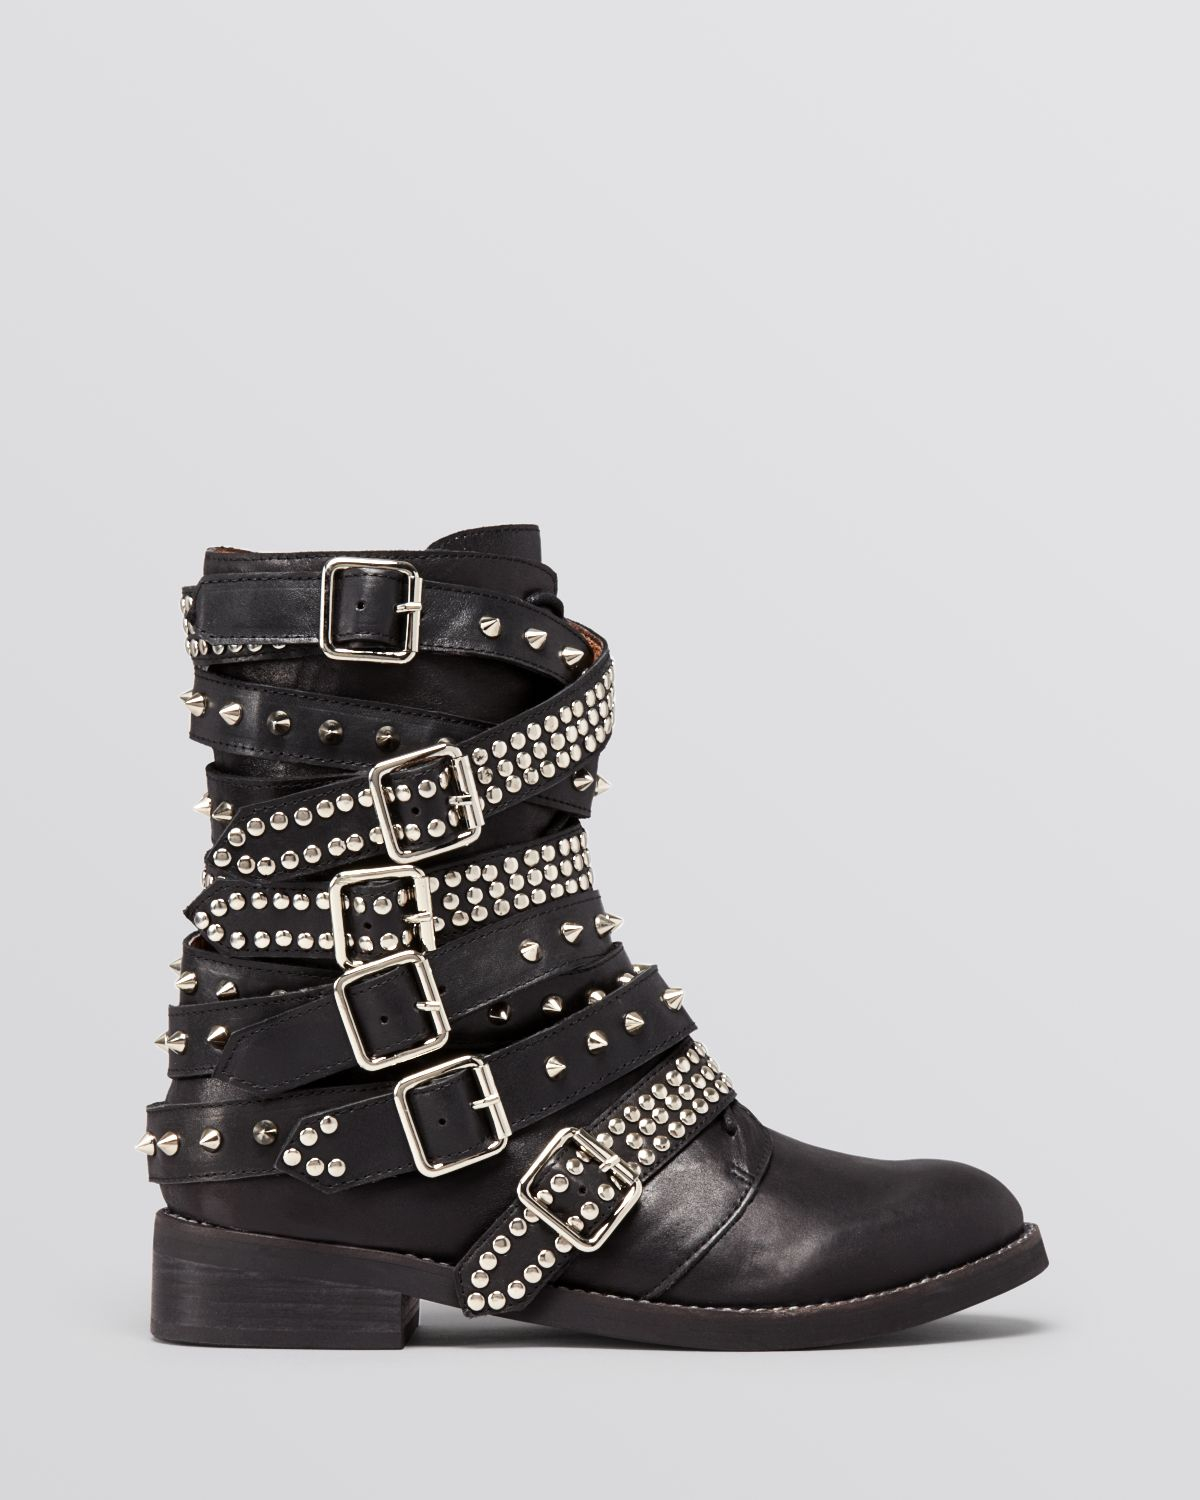 Jeffrey campbell Short Boots - Cruzados Studded in Black | Lyst